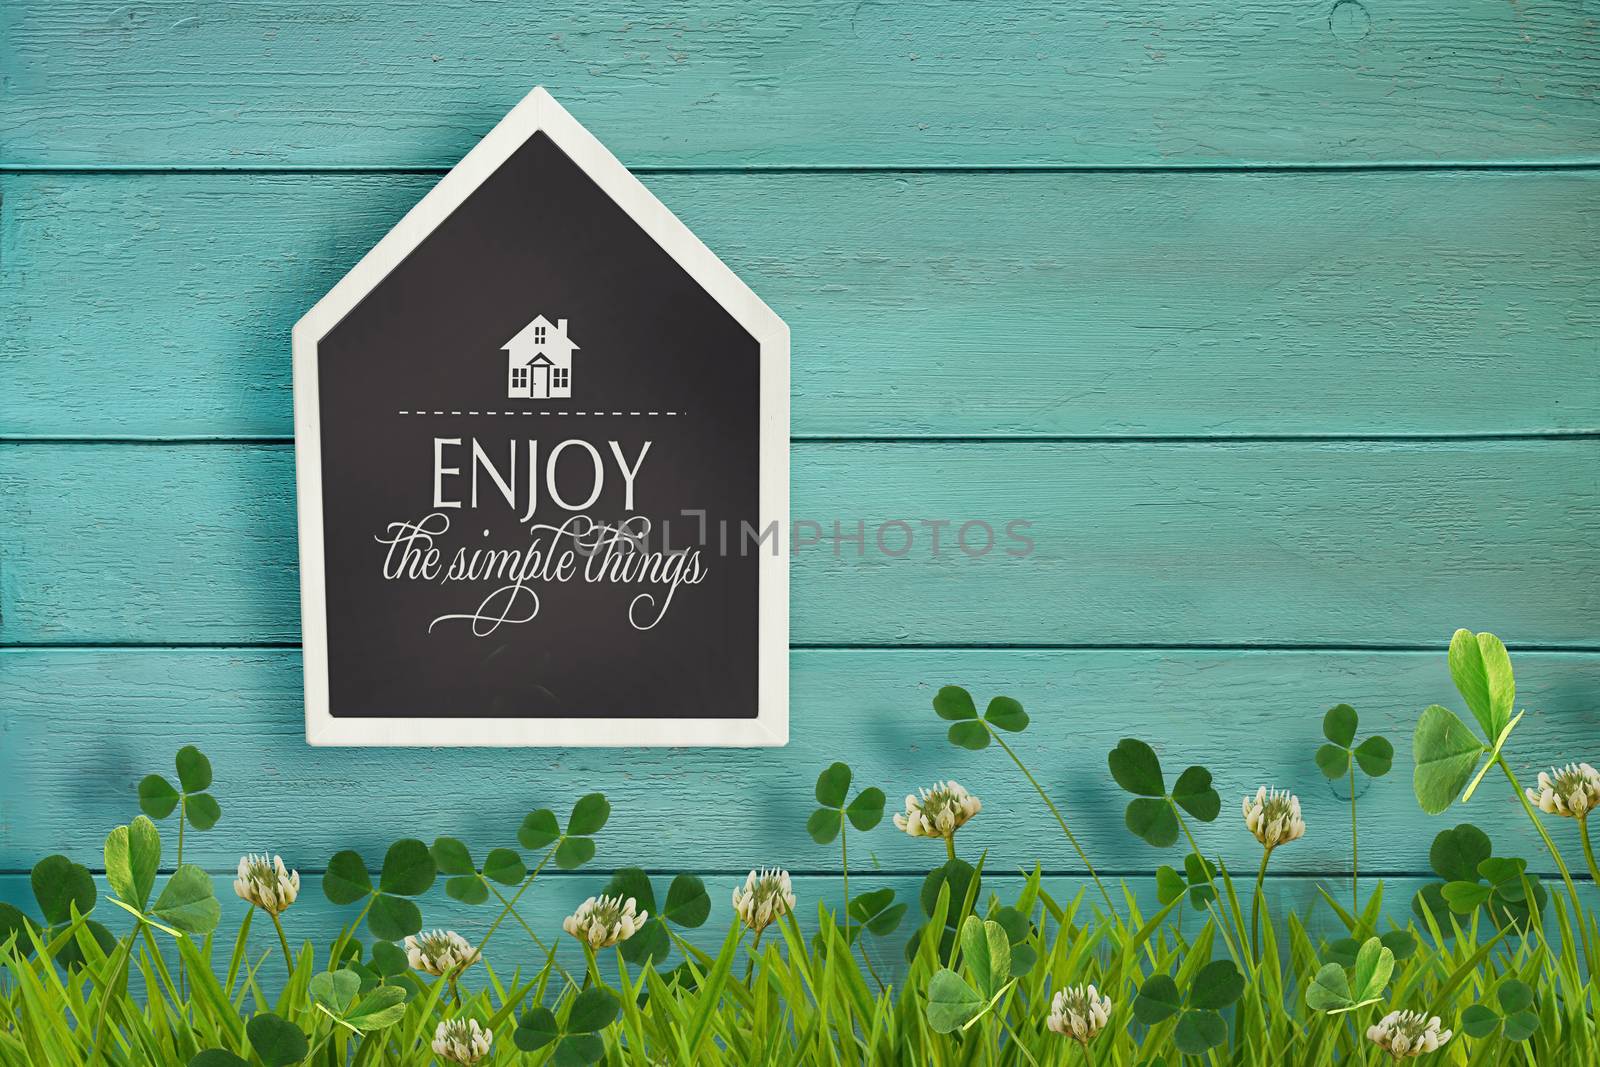 House shaped chalkboard and grass on wooden background